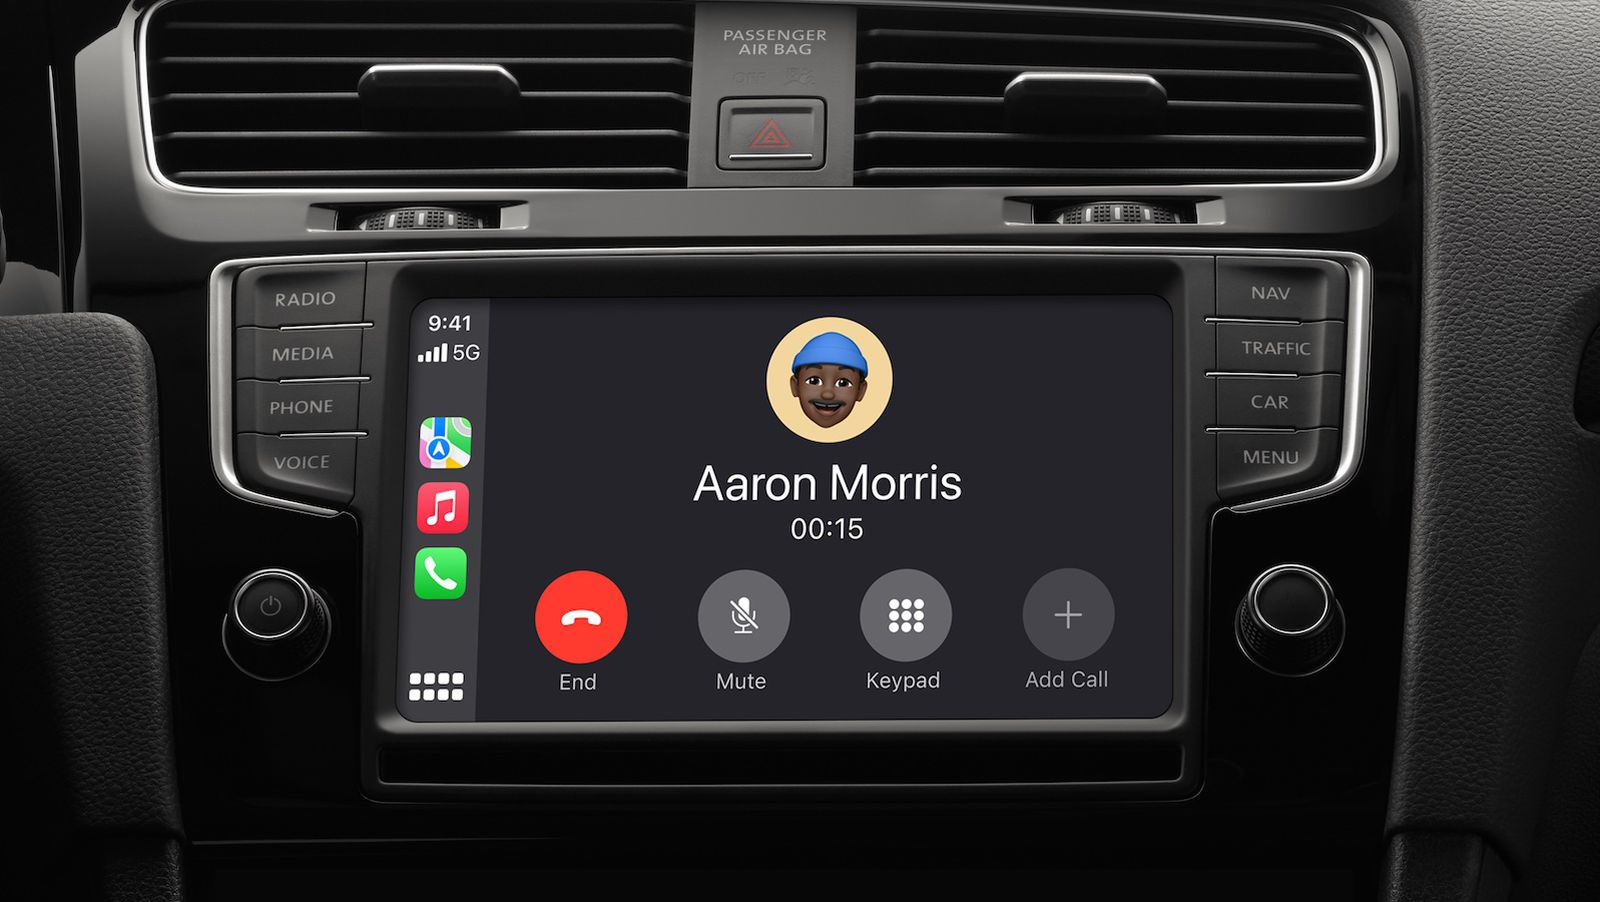 GM says it’s ditching CarPlay to make drivers safer